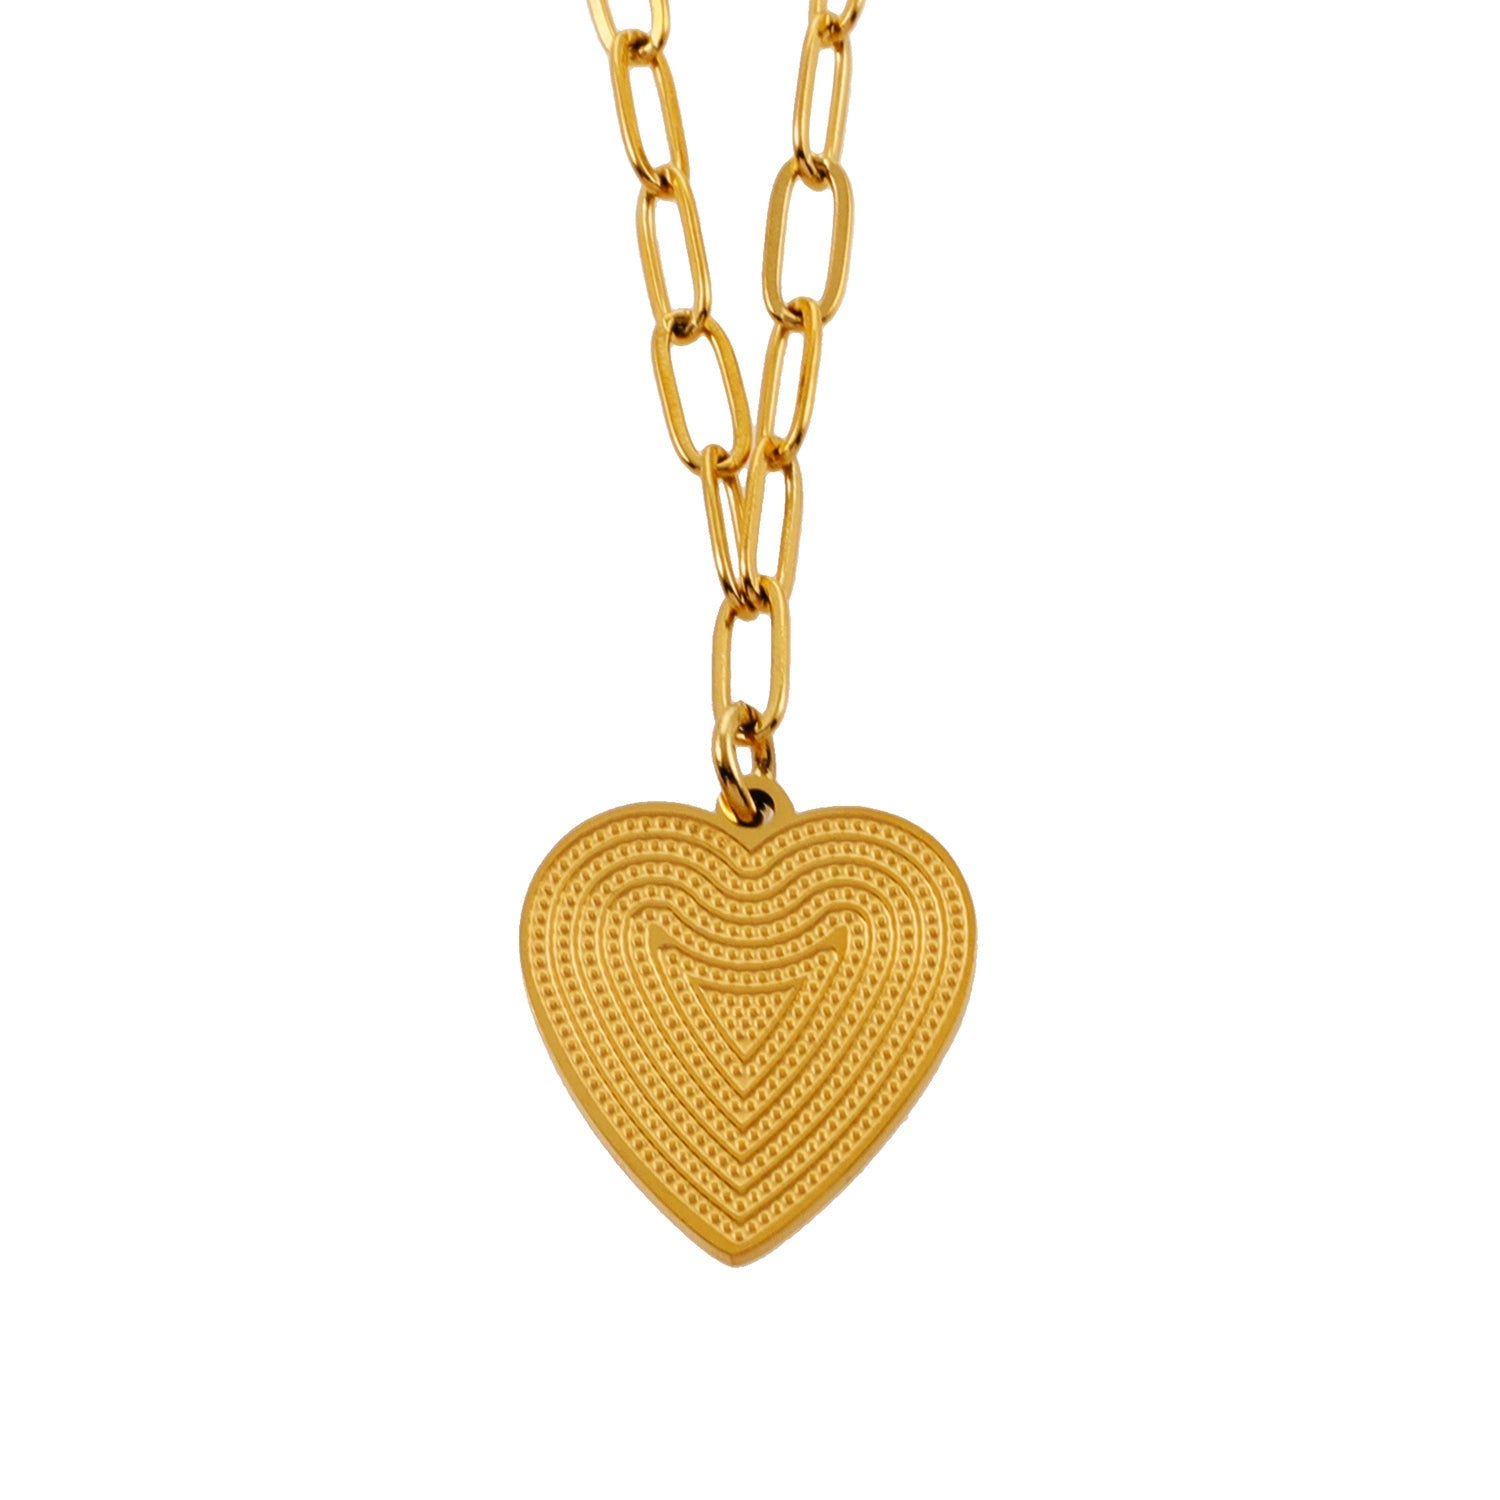 Style ALARA 03515: Mini Paper Clip Chain Anchoring a Patterned Heart Charm